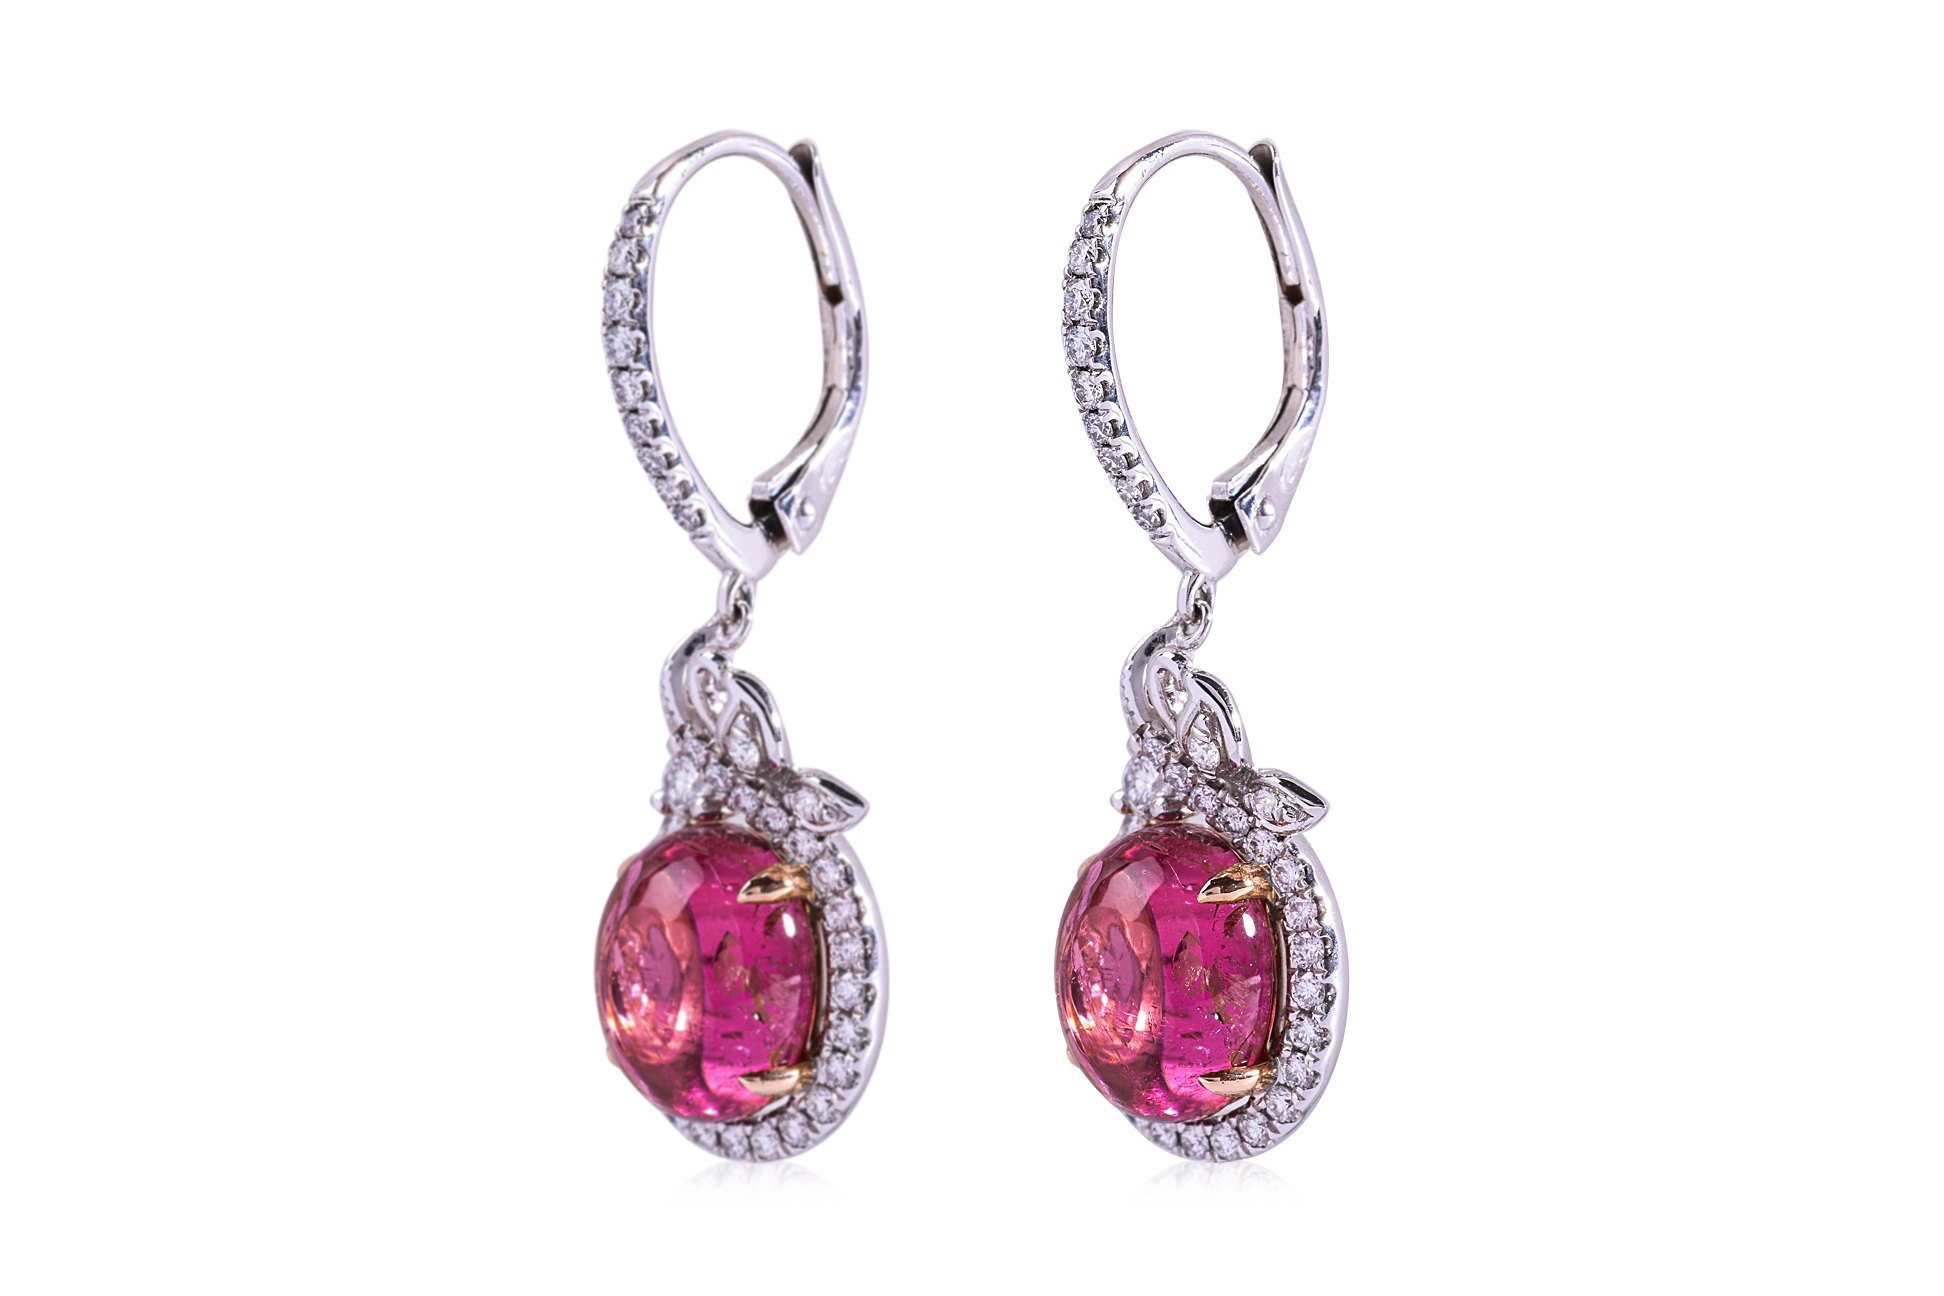 A PAIR OF PINK TOURMALINE AND DIAMOND EARRINGS - Image 2 of 4